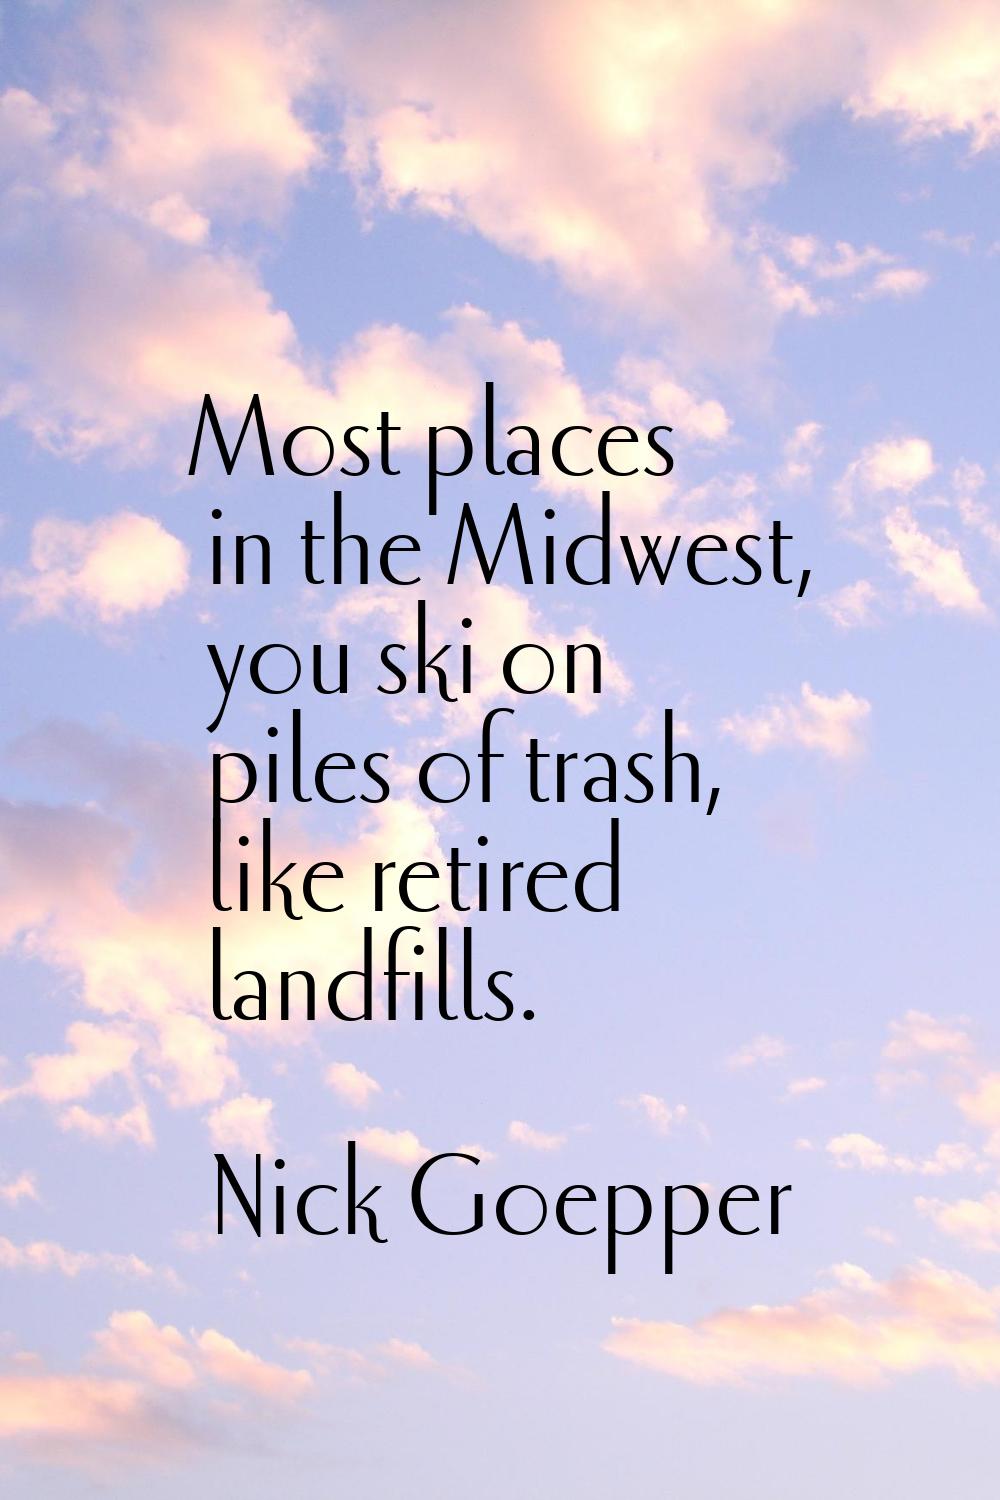 Most places in the Midwest, you ski on piles of trash, like retired landfills.